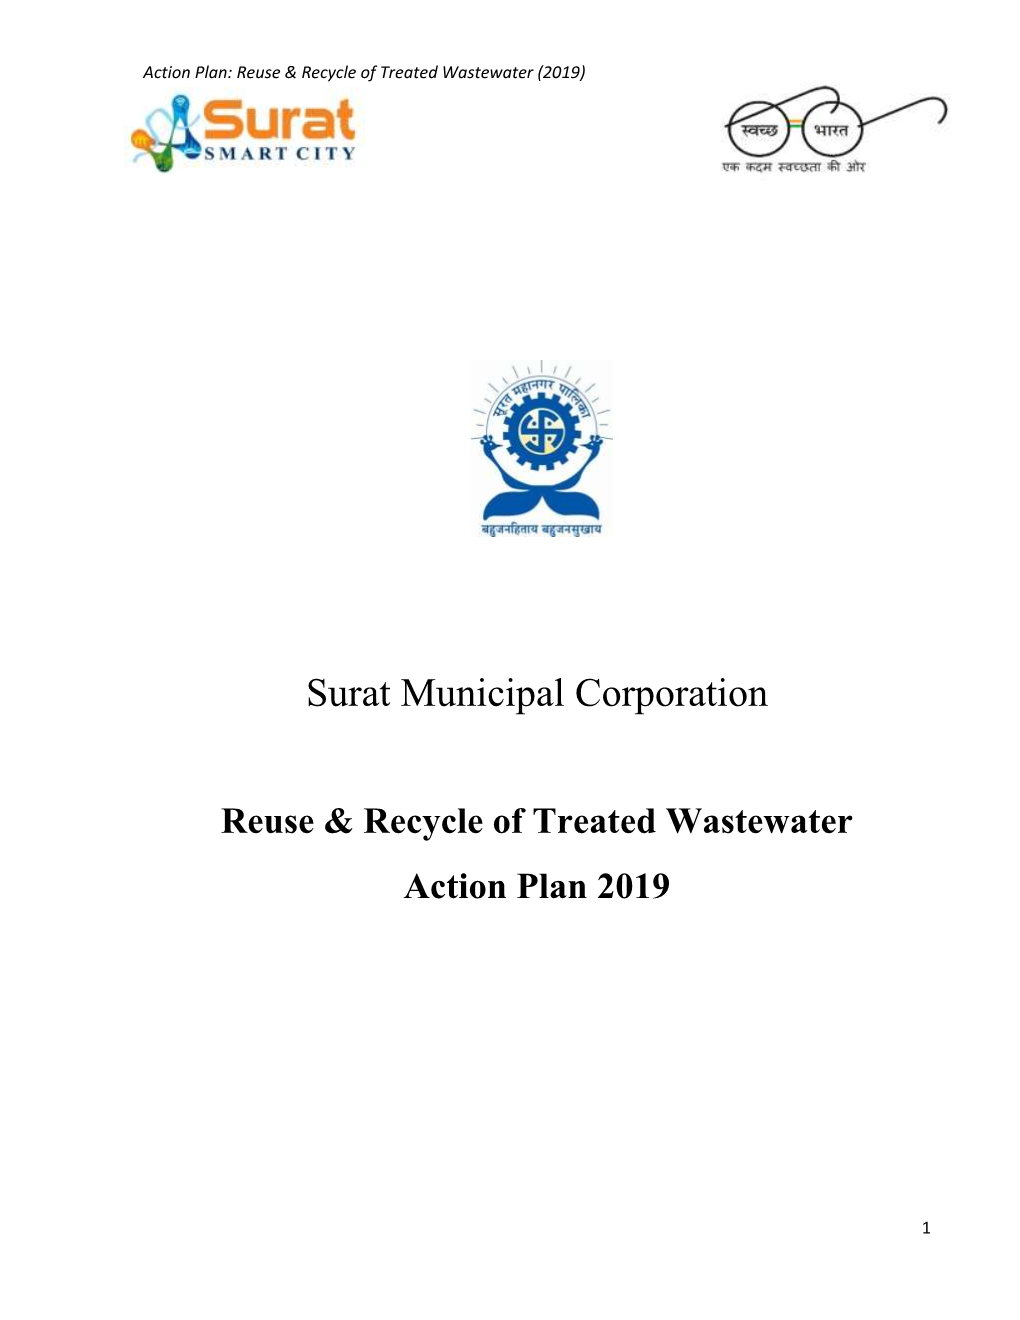 Reuse & Recycle of Treated Wastewater Action Plan 2019